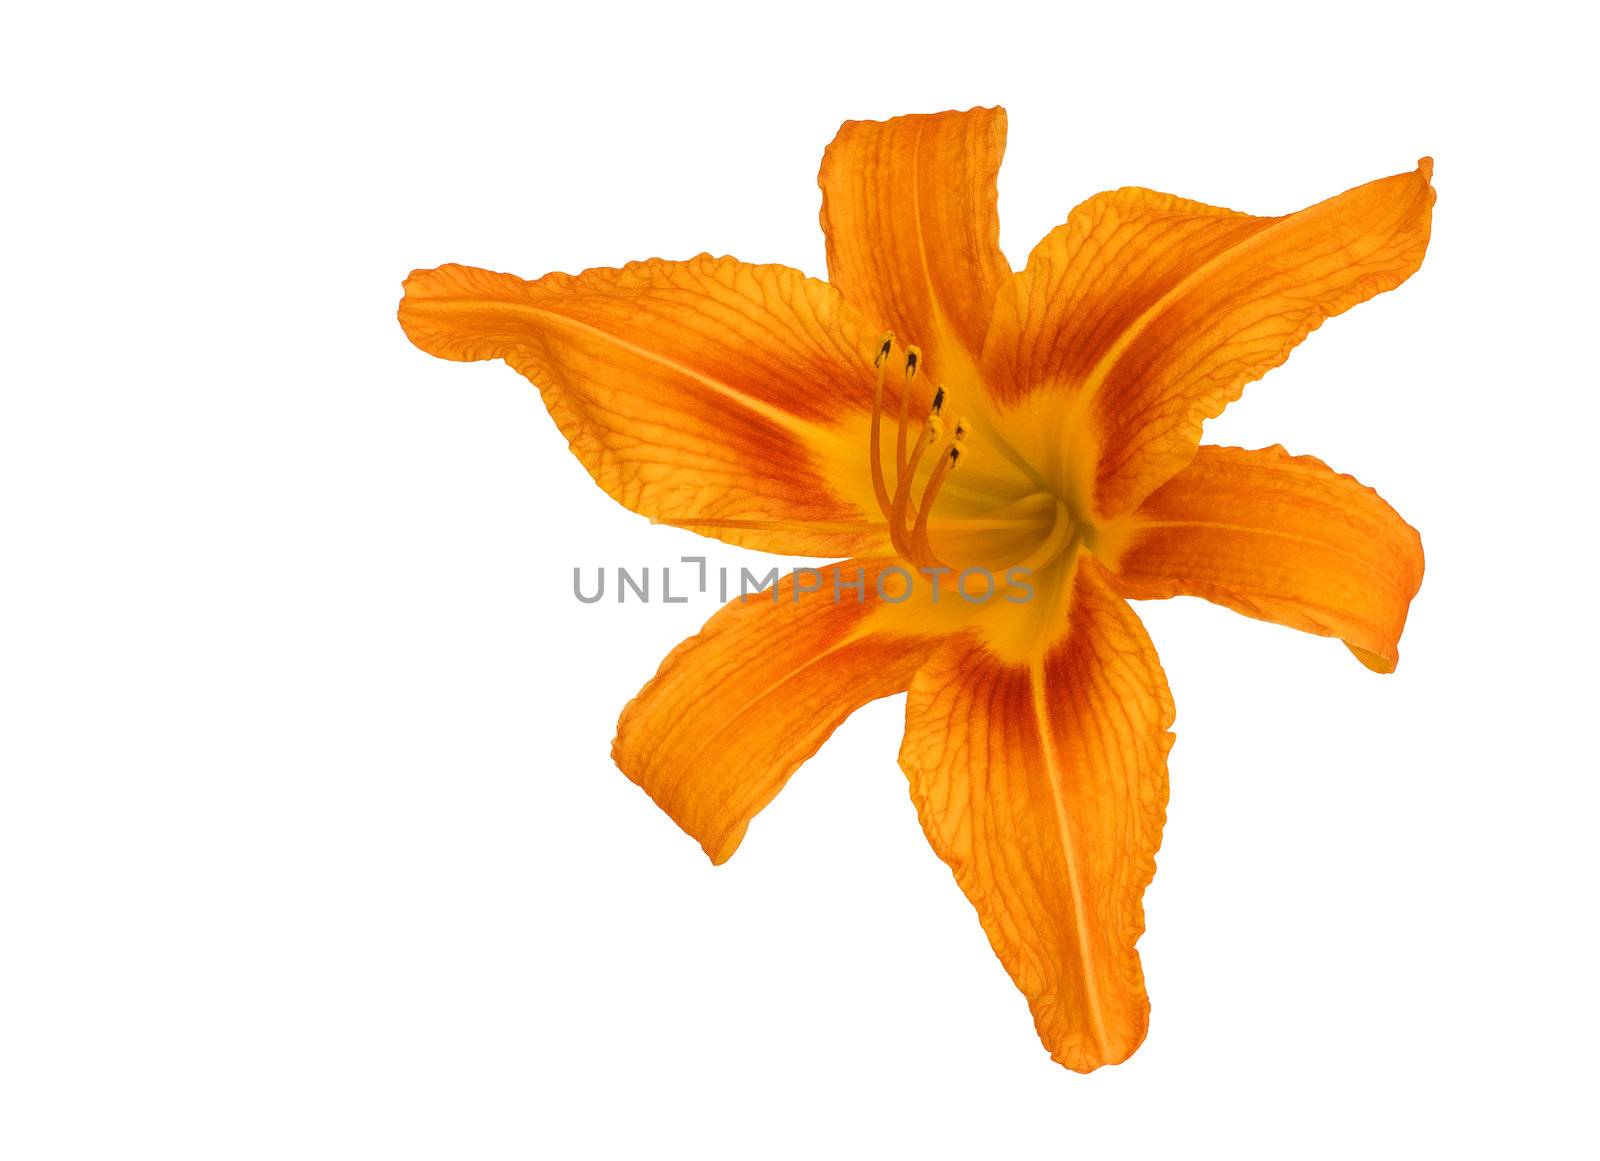 Tiger Lily isolated on a white background. It is one of several species of lily to which the common name Tiger lily is applied, and the species most widely so known.